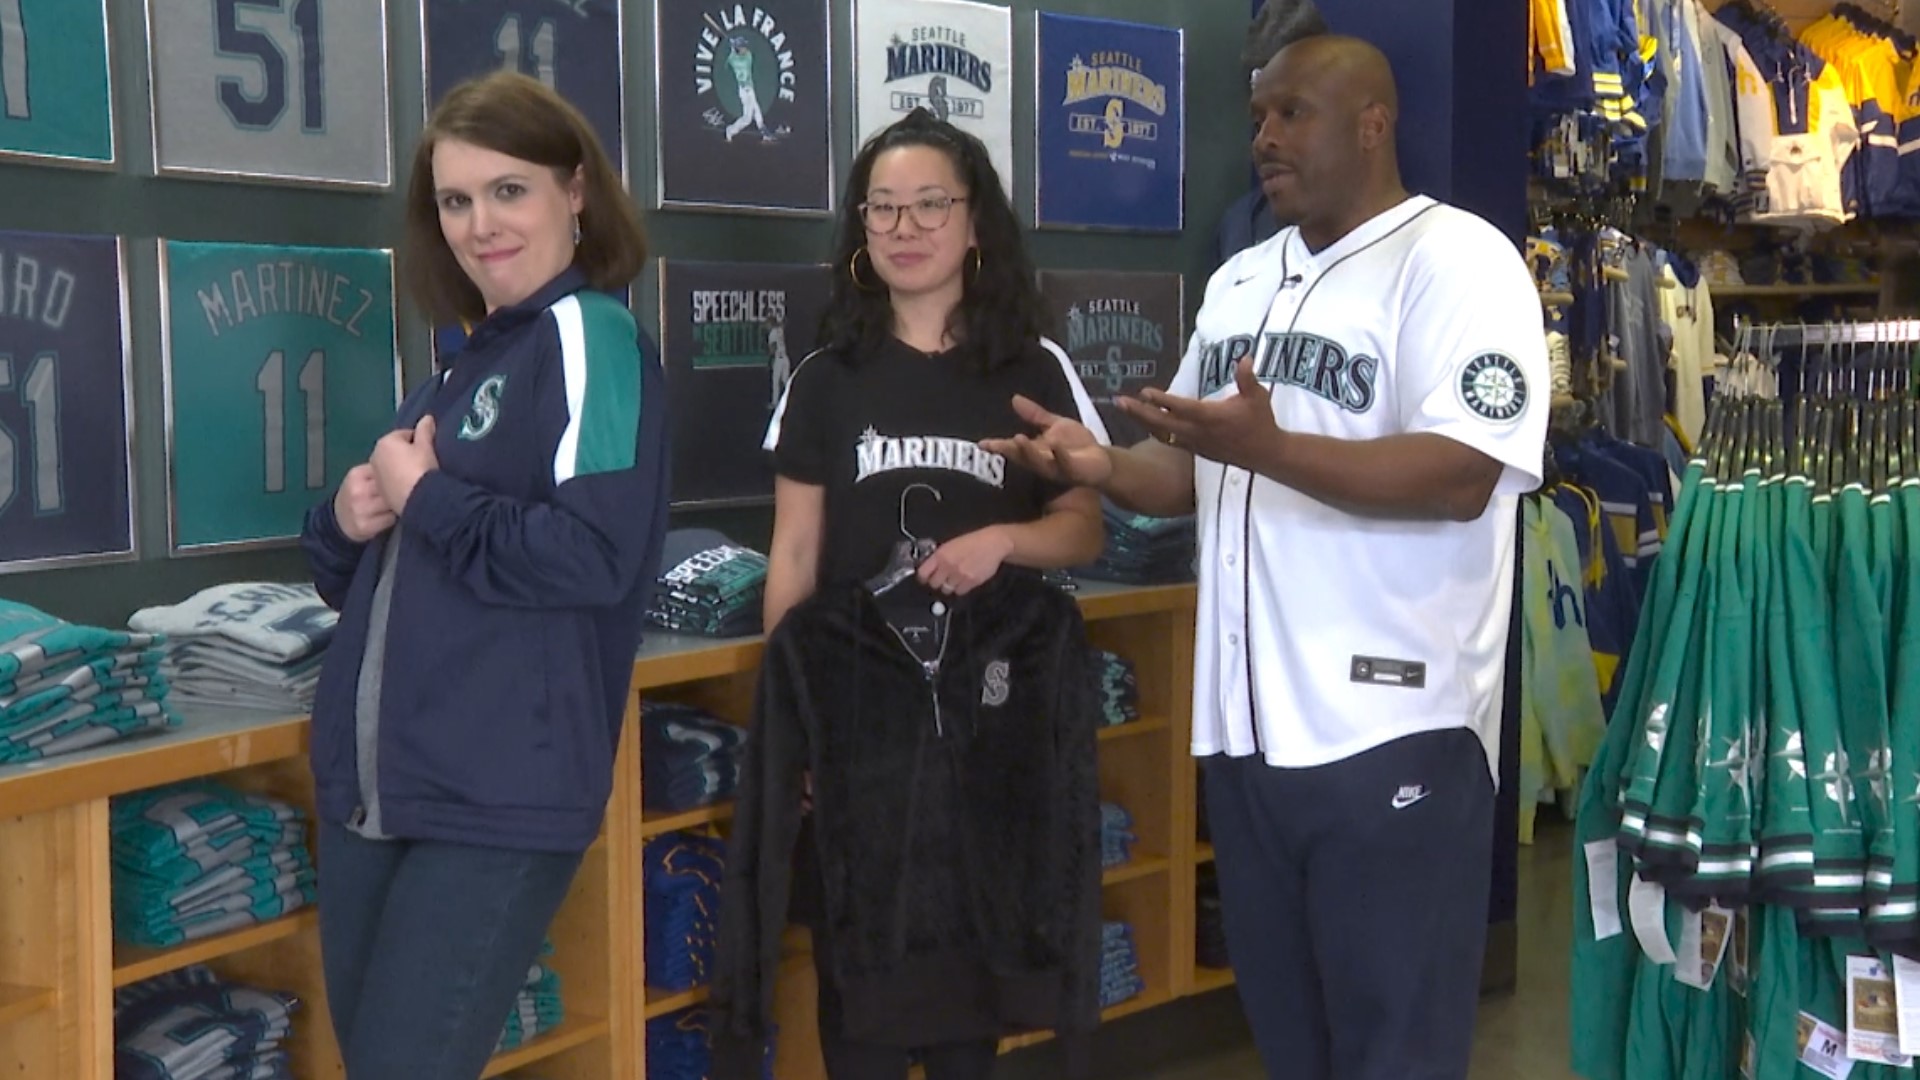 The Mariners Team shop has something for everyone. Our friend Terry Hollimon checks out the hot selling items and what's new this season. #newdaynw